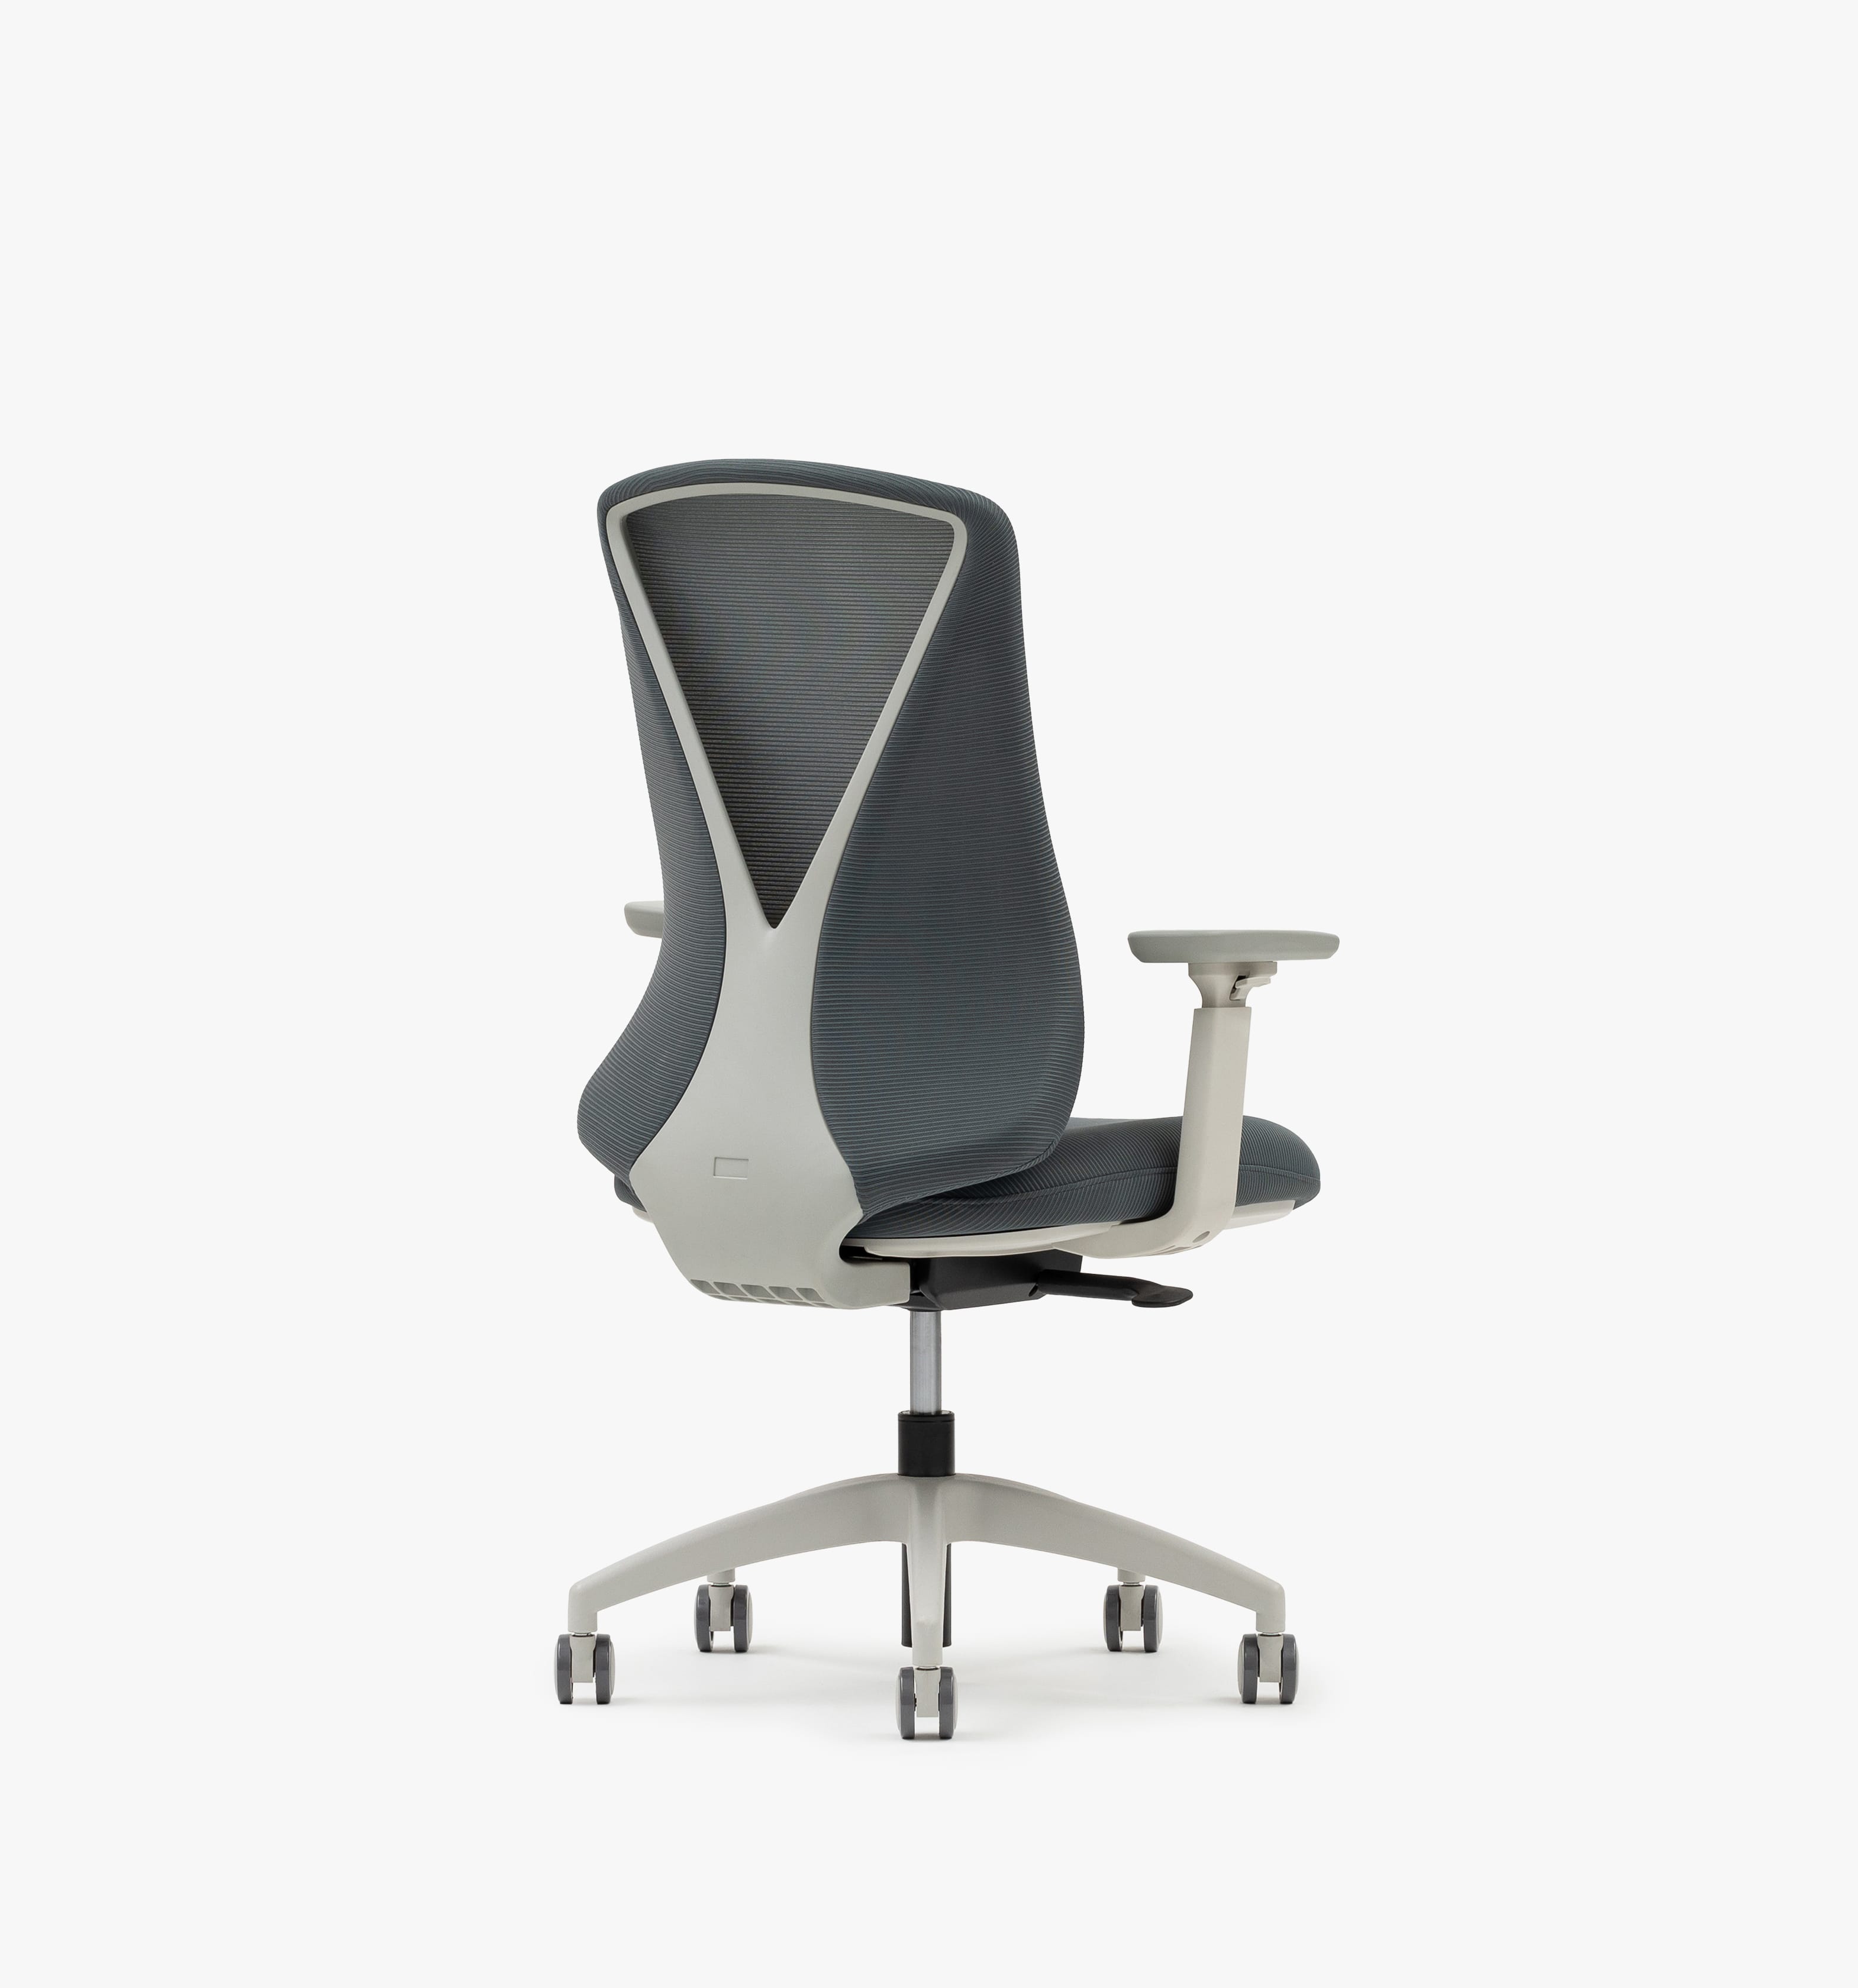 The Chelsea Chair - grey